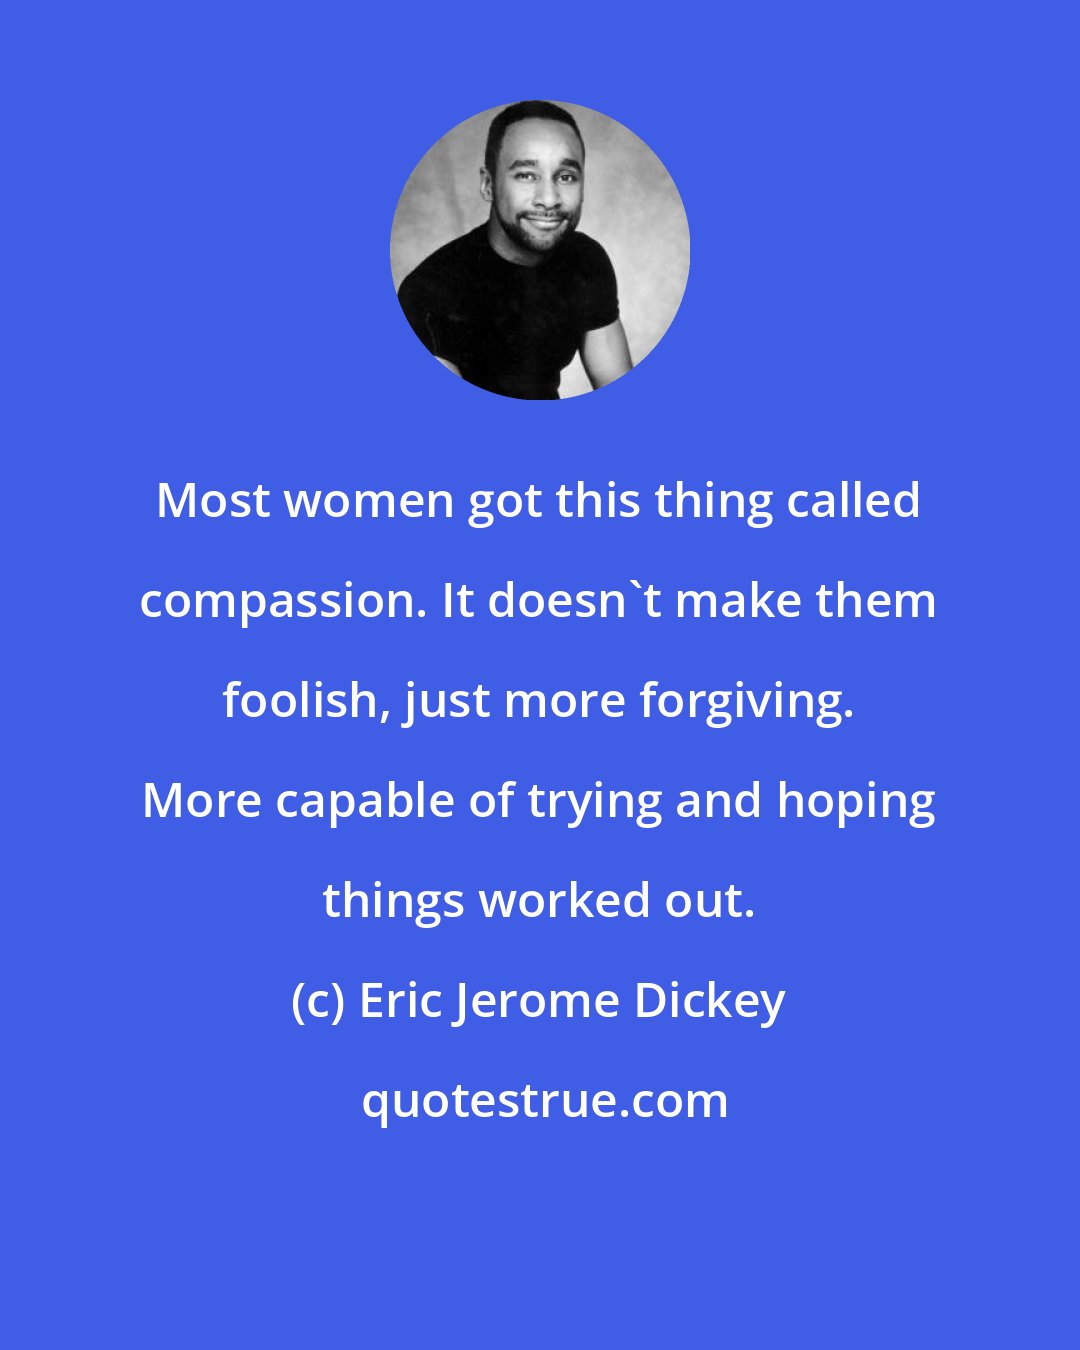 Eric Jerome Dickey: Most women got this thing called compassion. It doesn't make them foolish, just more forgiving. More capable of trying and hoping things worked out.